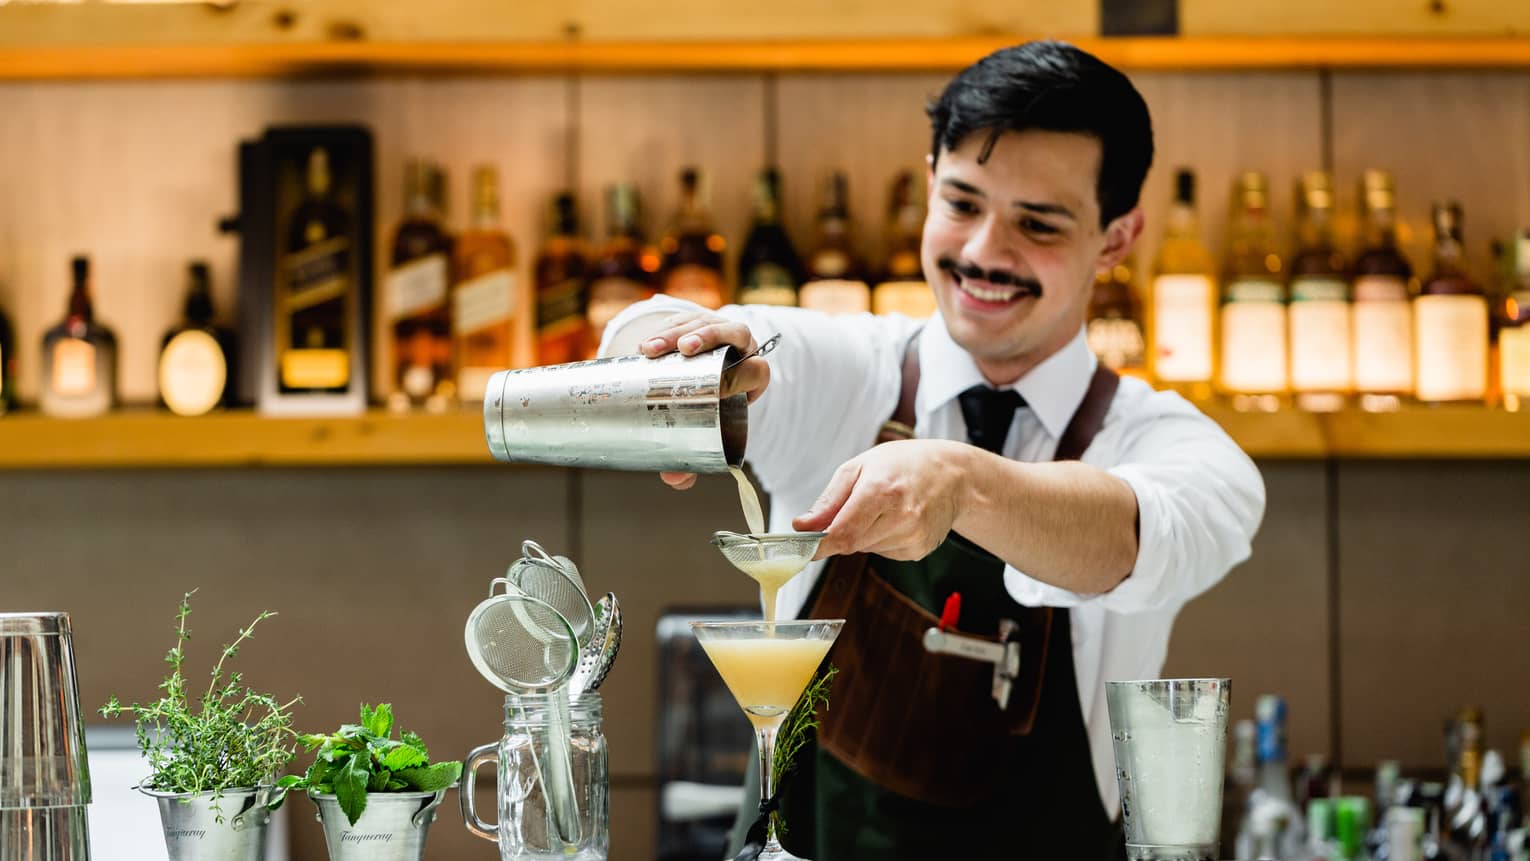 Smiling bartender pours orange cocktail from shaker into martini glass at bar 